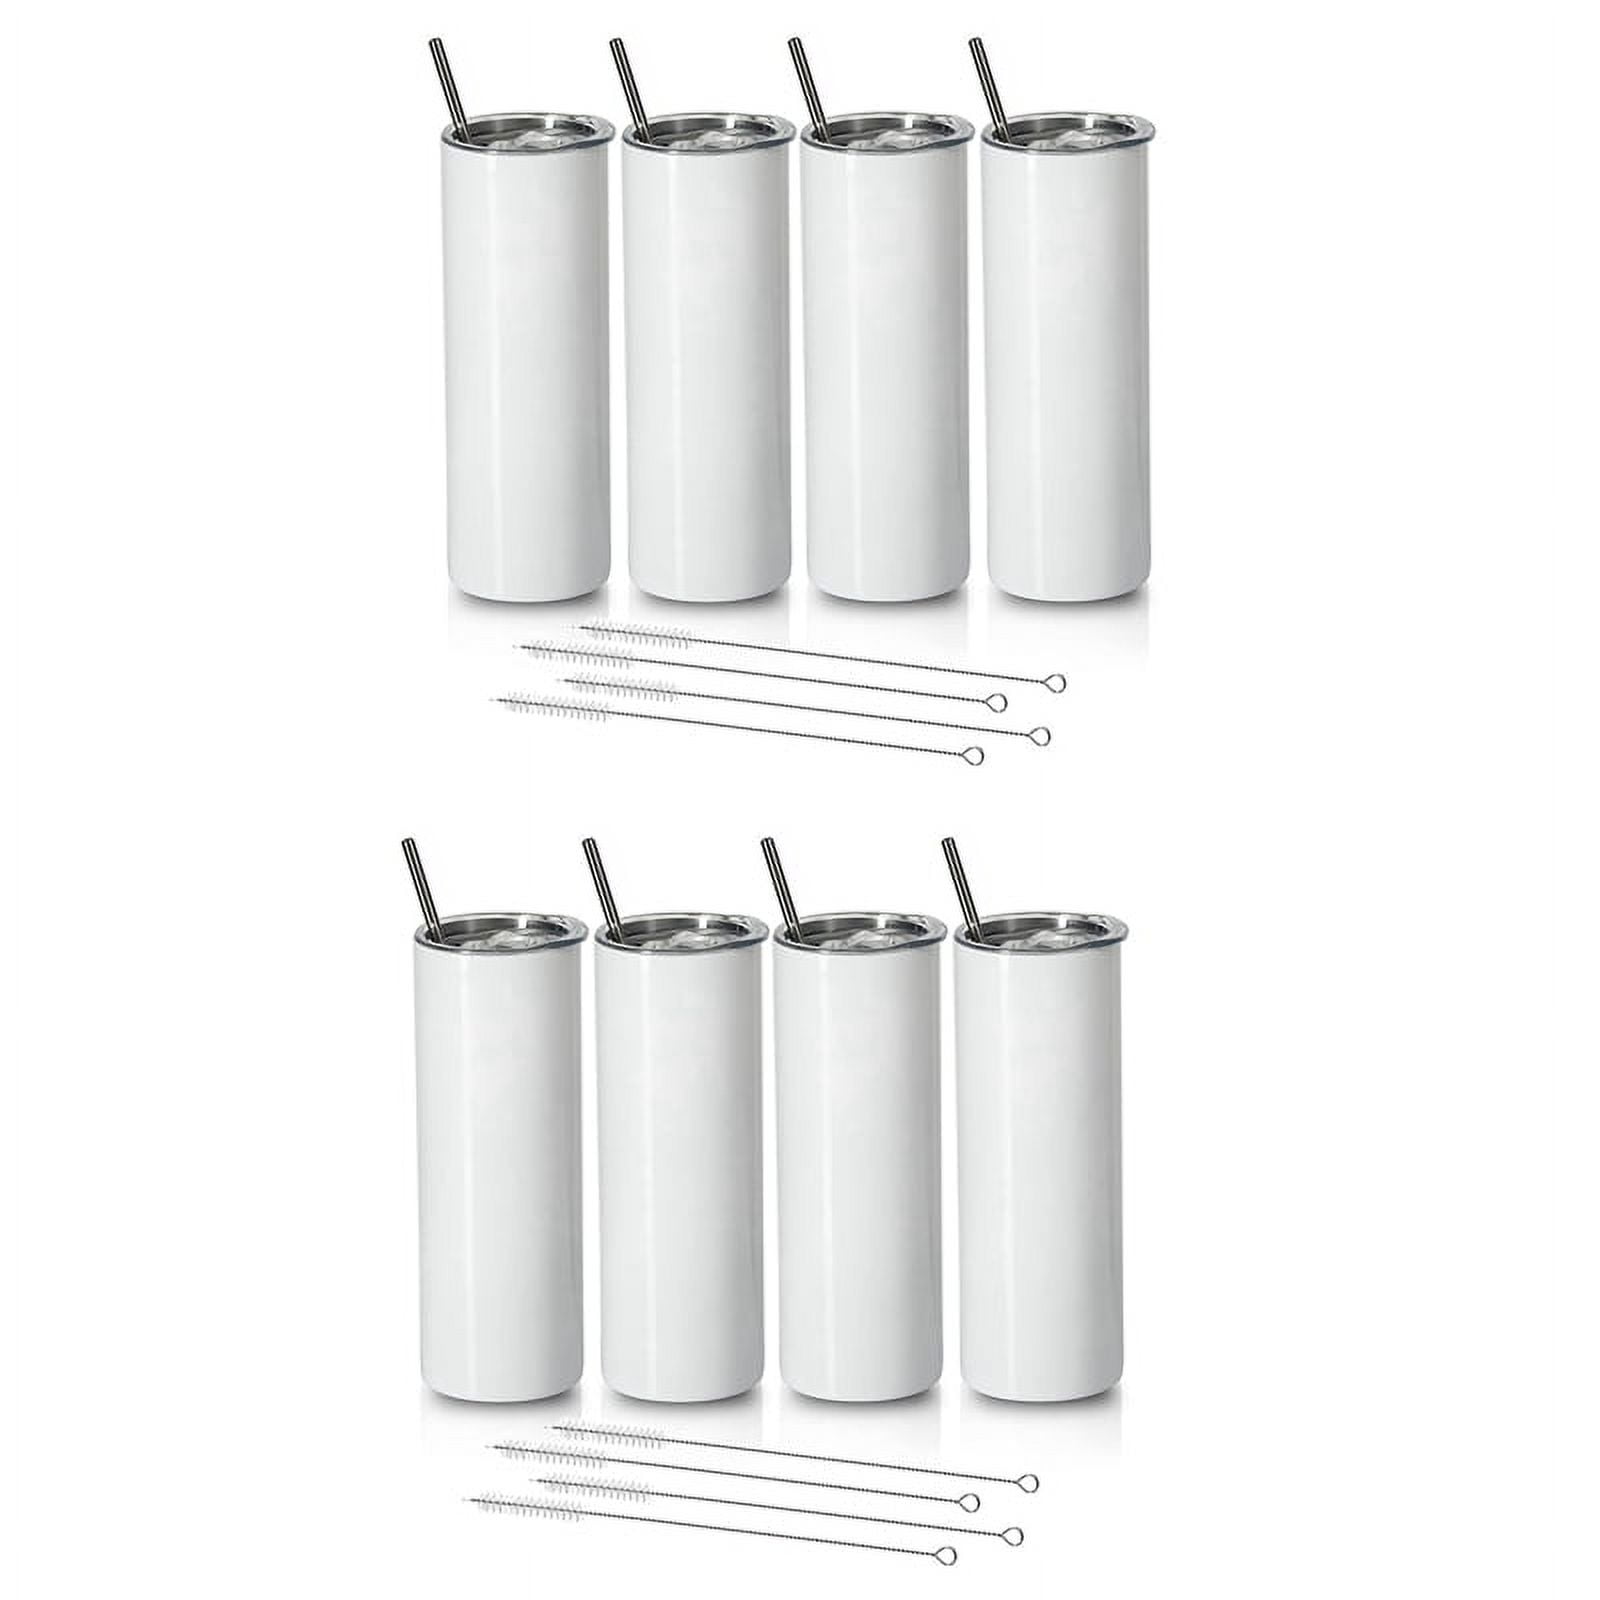 16 Pack Sublimation Tumblers 20 oz Skinny,Stainless Steel Insulated  Sublimation Blanks Tumbler with Lid,Straw - Bed Bath & Beyond - 39701225